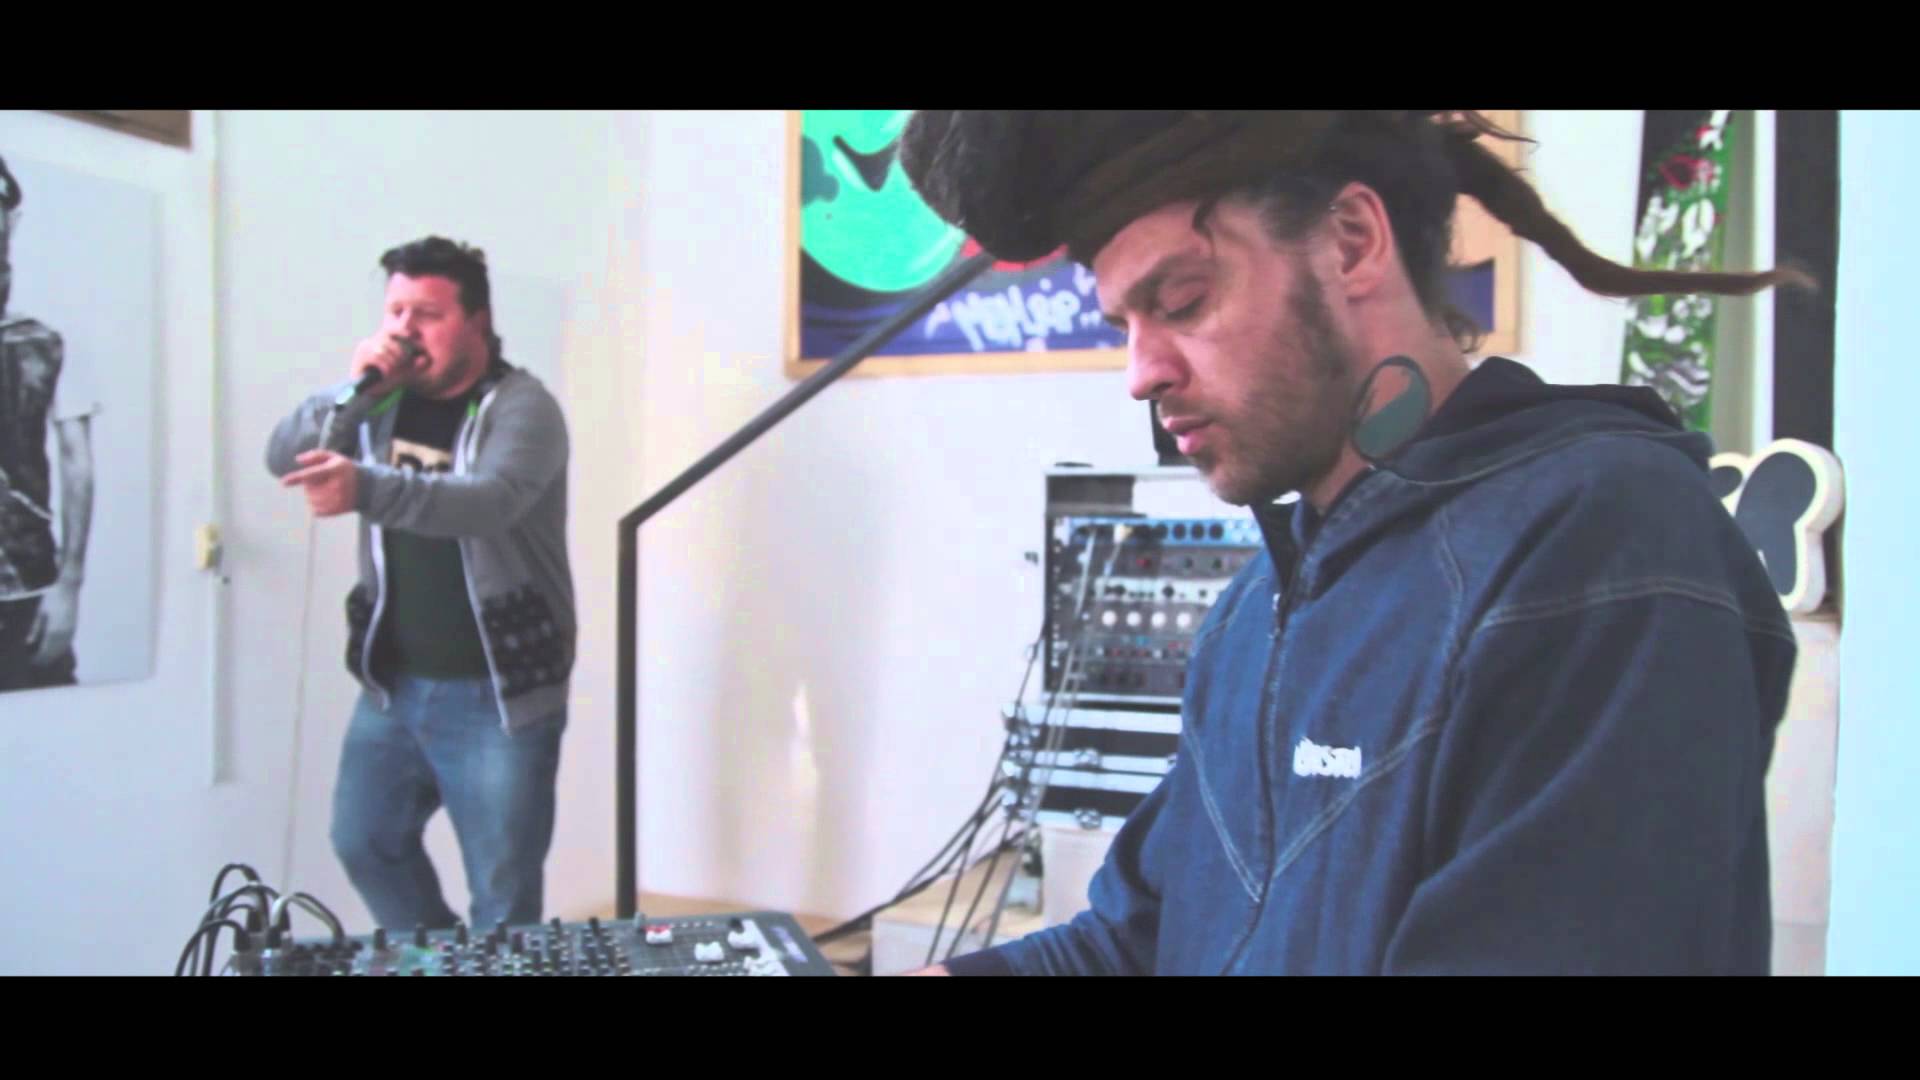 Paolo Badlini Dub Files meets Forelock - Singing One Love @ LBSTR Storehouse [6/19/2015]